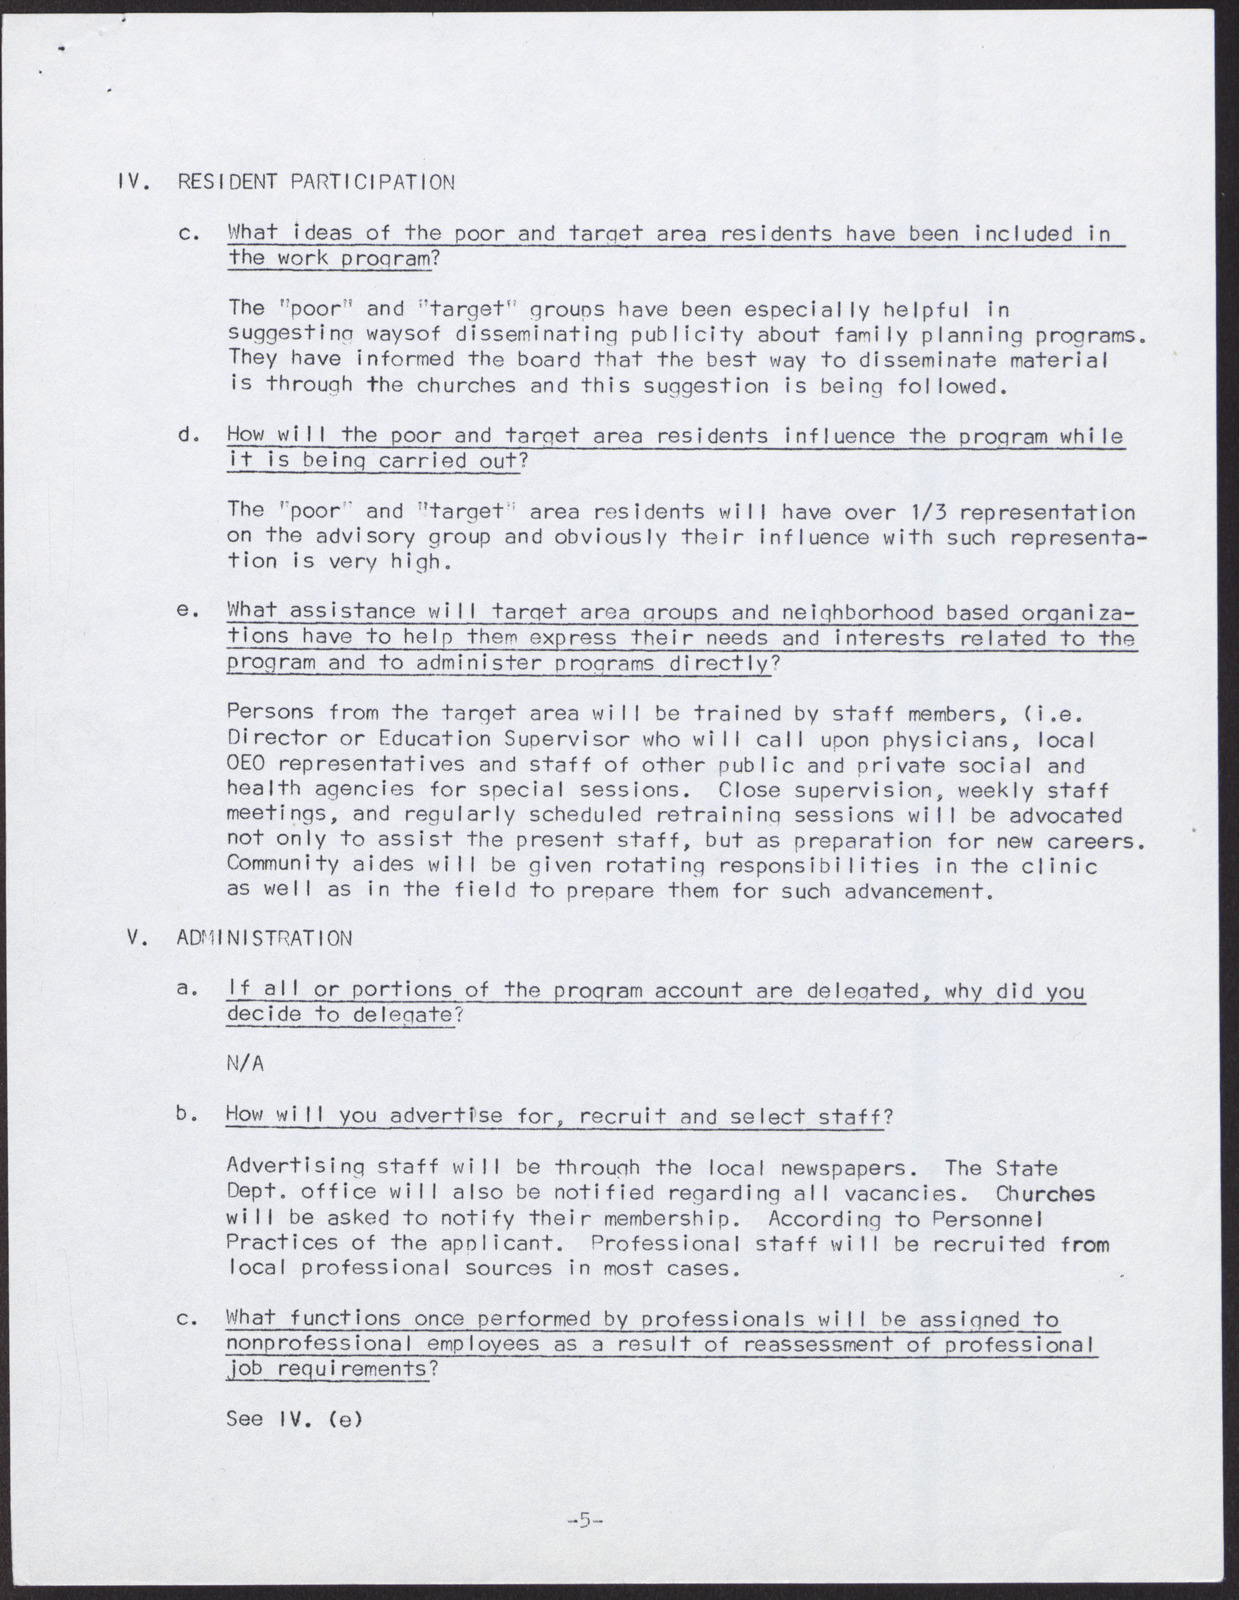 United Fund of Clark County, Inc. Manual of Operations (8 pages, possibly out of sequence or unrelated), no date, page 6